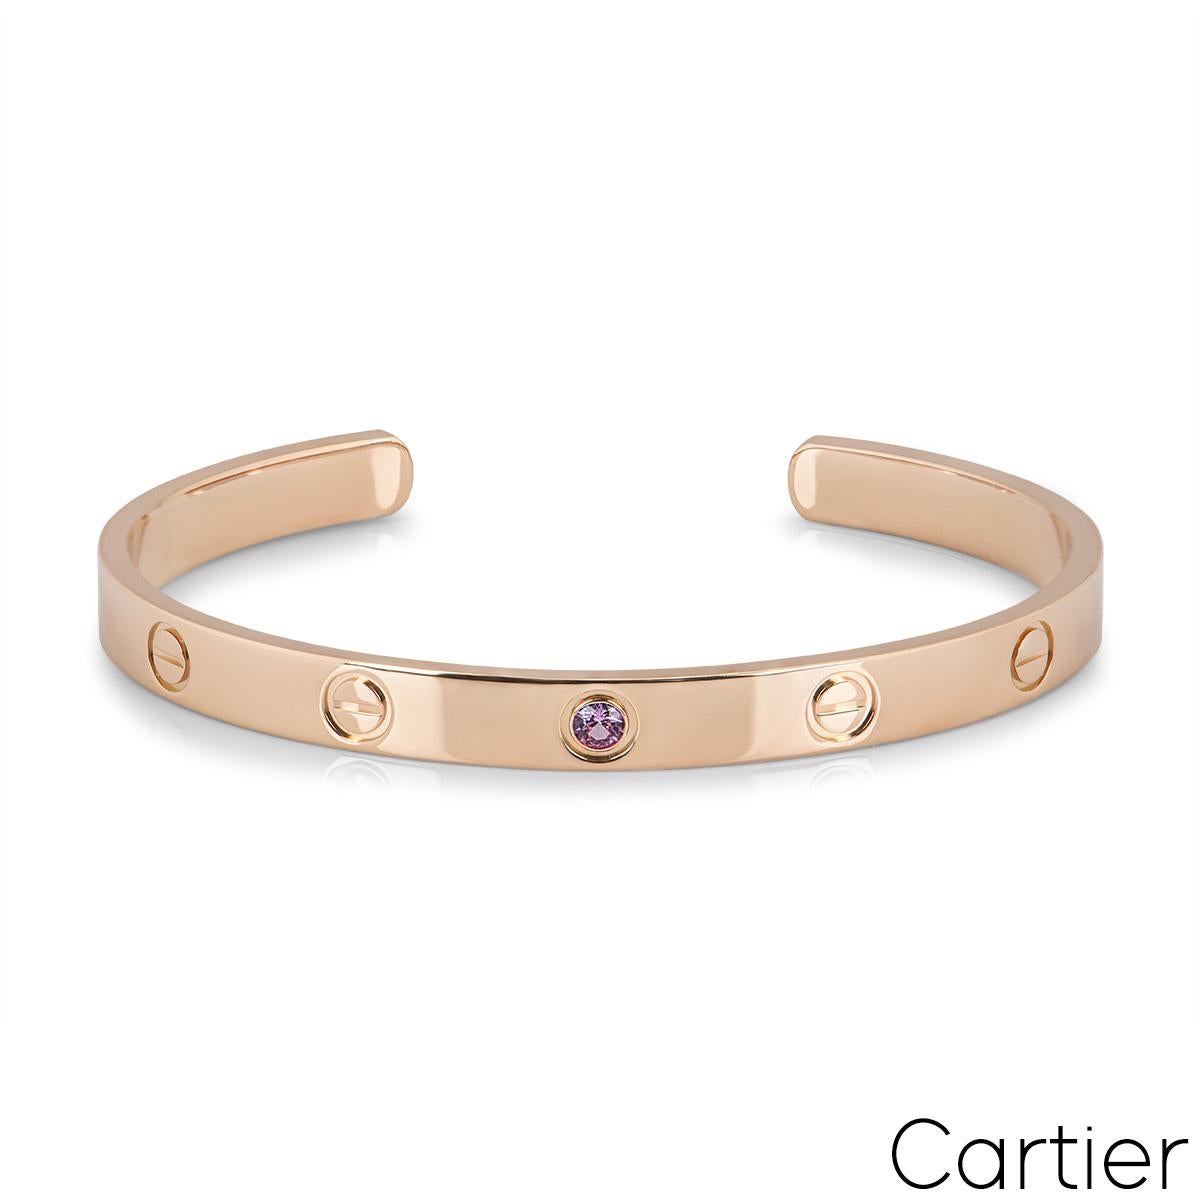 An 18k rose gold cuff bracelet by Cartier from the iconic Love collection. This cuff bracelet has the iconic screw motif displayed throughout with a single pink sapphire in the centre. The bracelet is a size 19 and has a gross weight of 28.1 grams.
